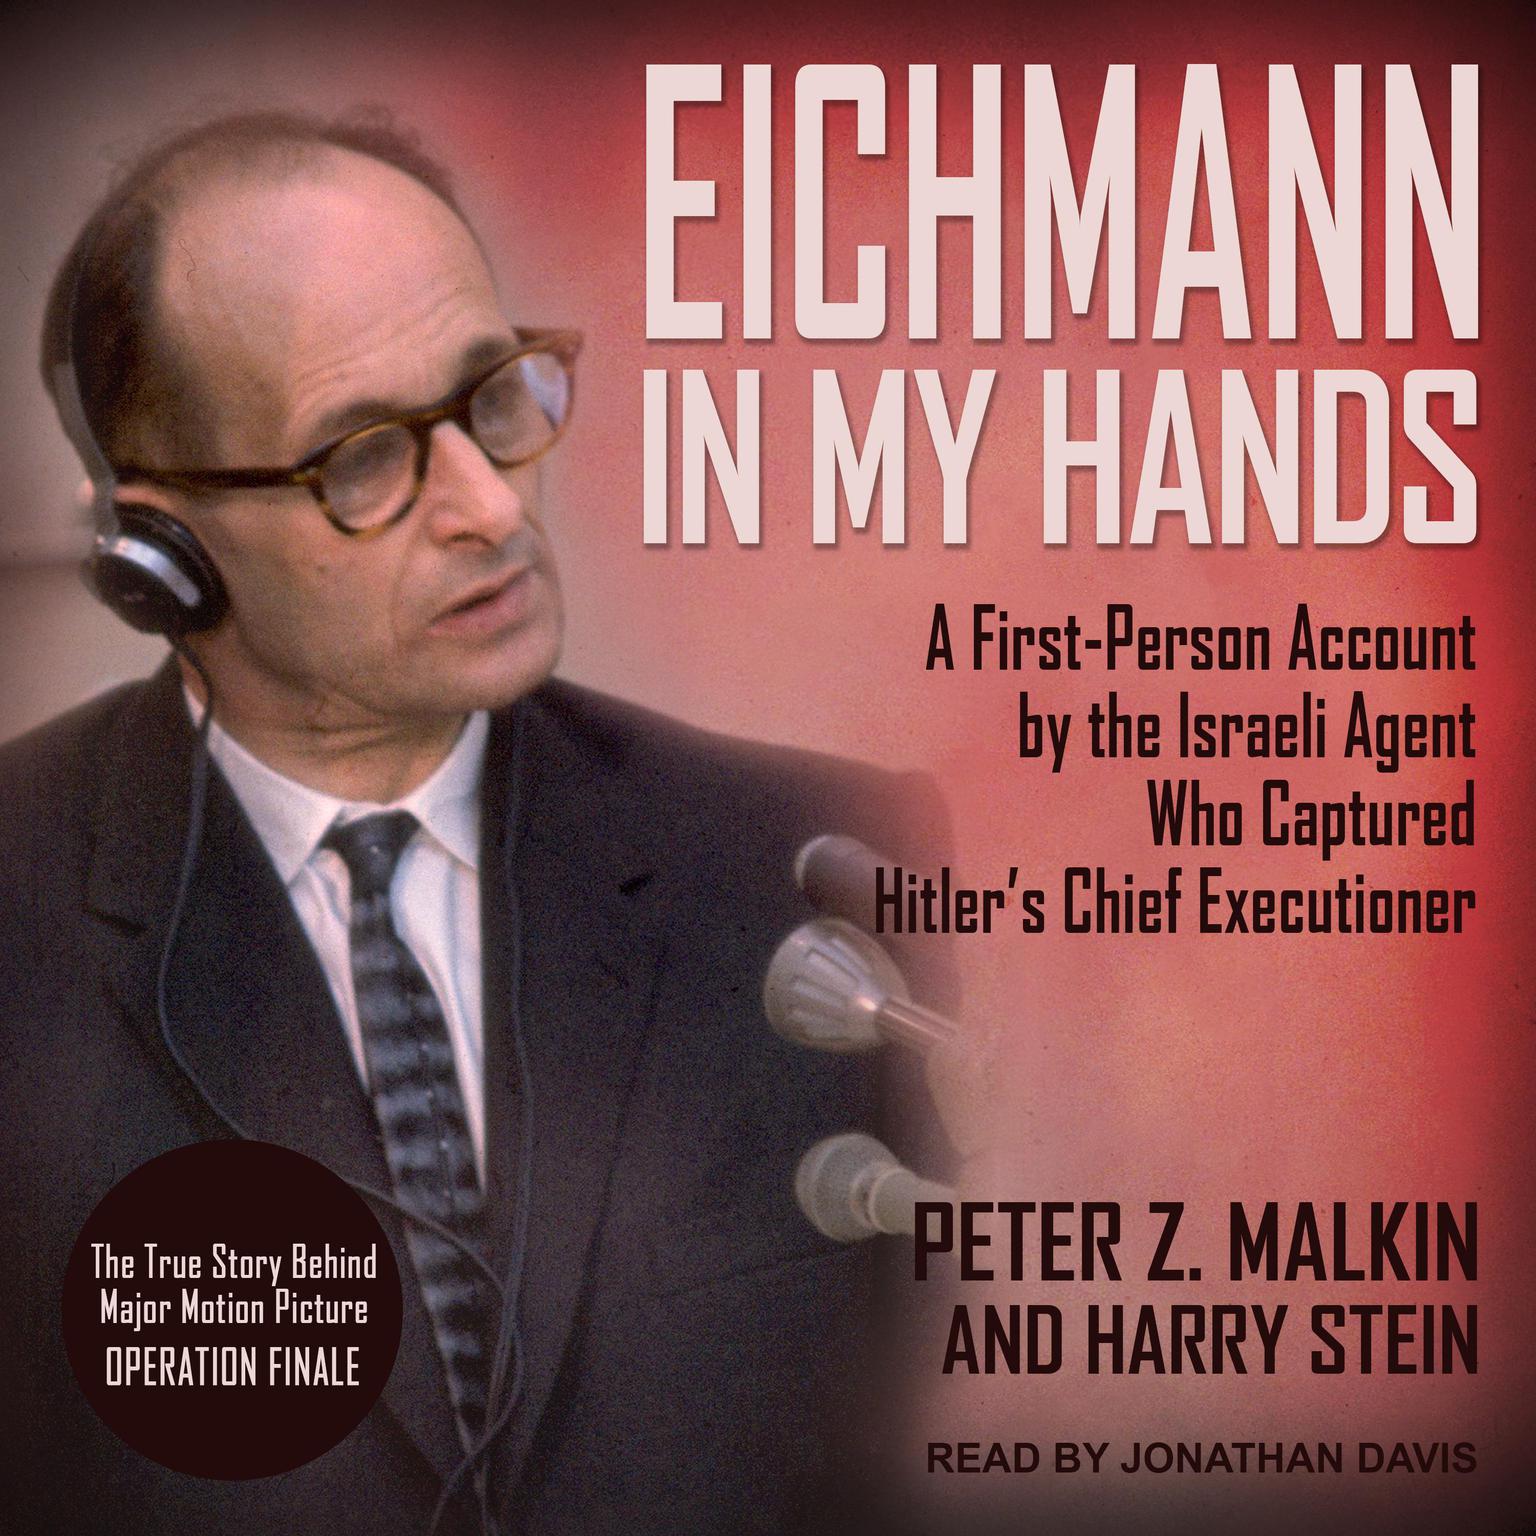 Eichmann in My Hands: A First-Person Account by the Israeli Agent Who Captured Hitlers Chief Executioner Audiobook, by Peter Z. Malkin